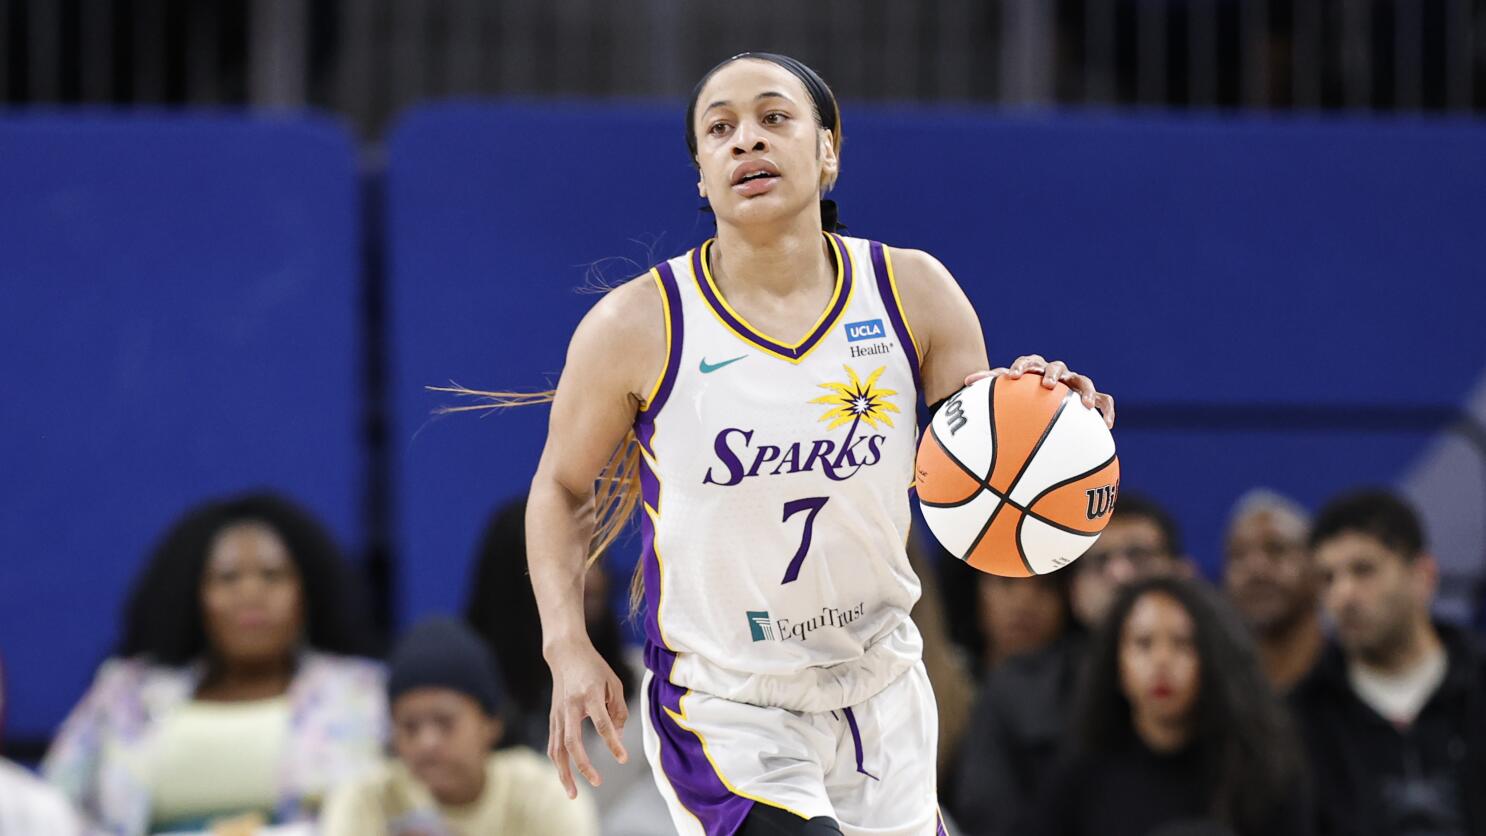 WNBA: Short-handed Los Angeles Sparks no match for Jackie Young, A